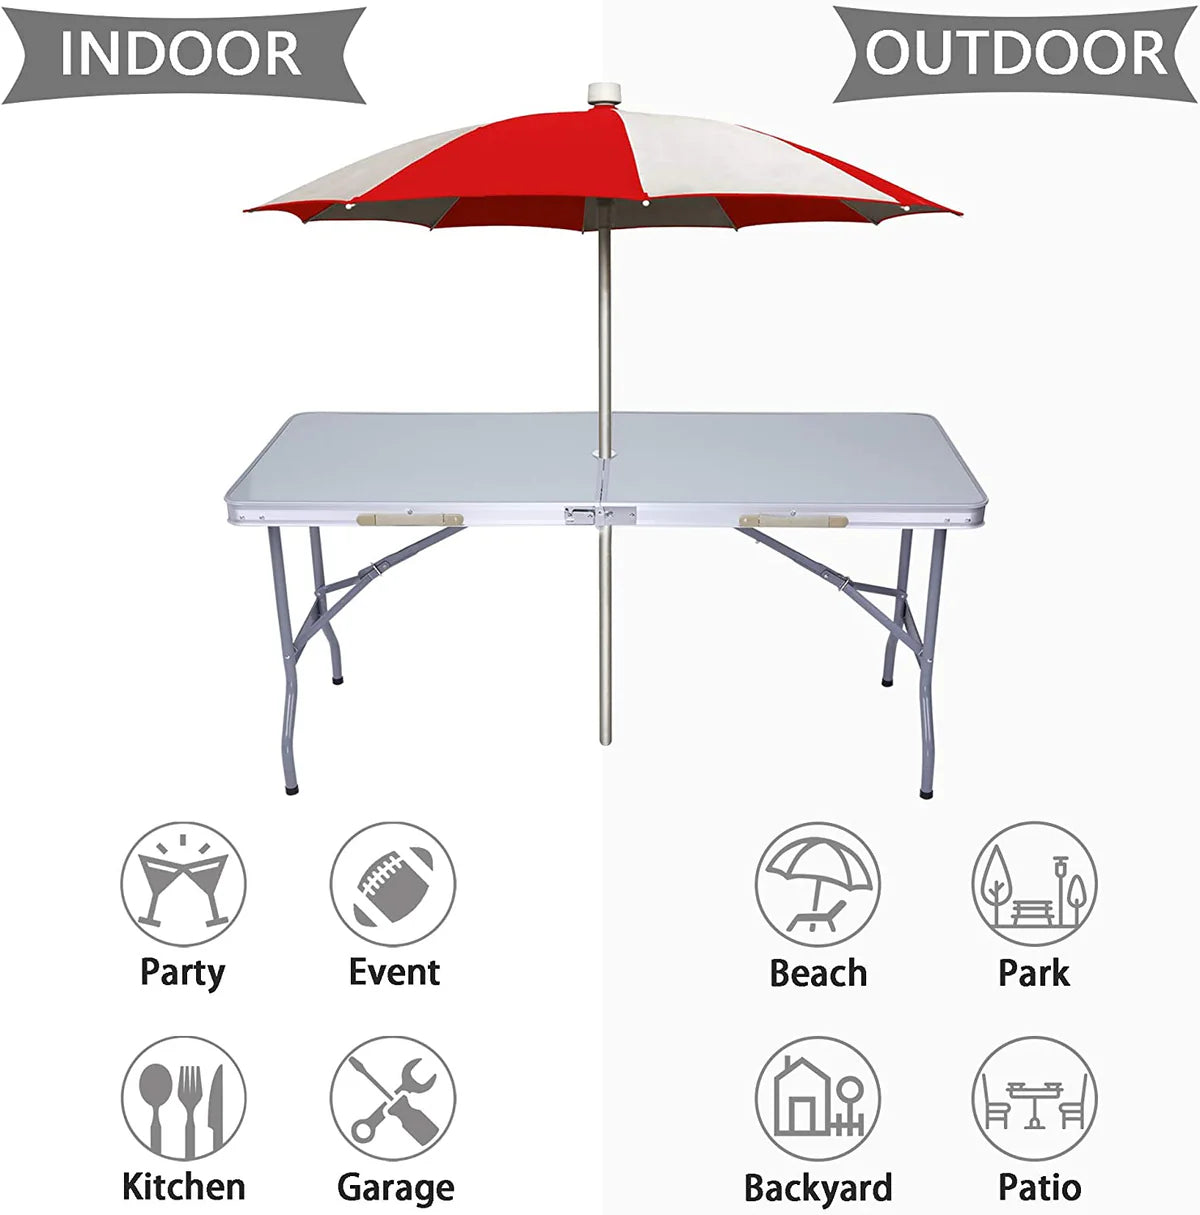 Portable Folding Camping Table 5 Ft Lightweight Table Suitcase Picnic Table with Umbrella Hole